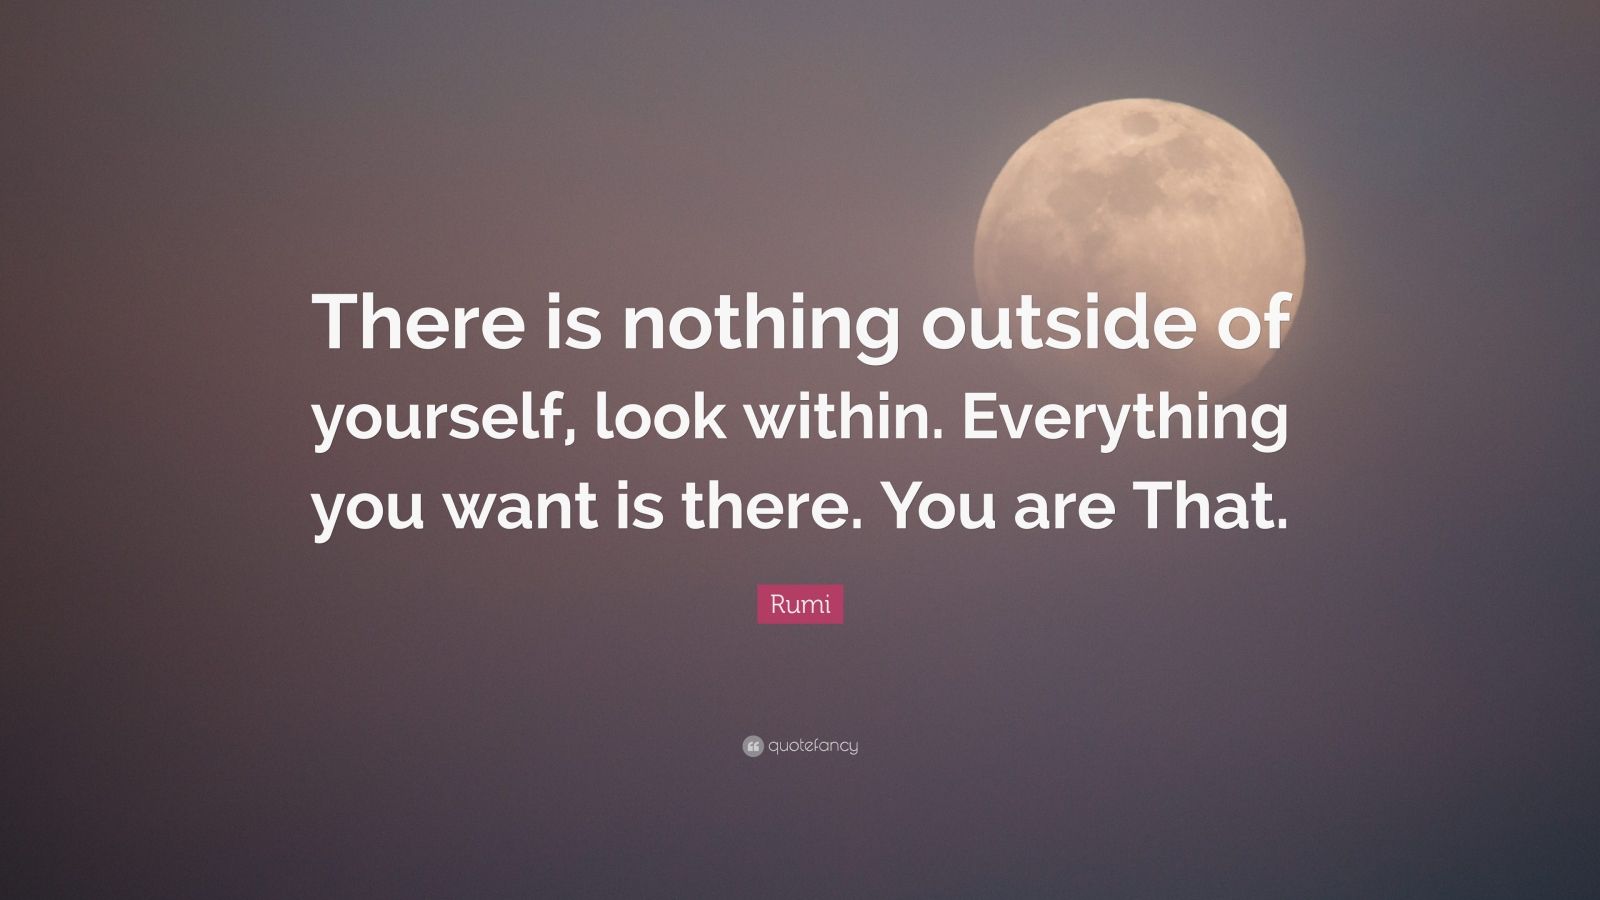 Rumi Quote: “There is nothing outside of yourself, look within ...